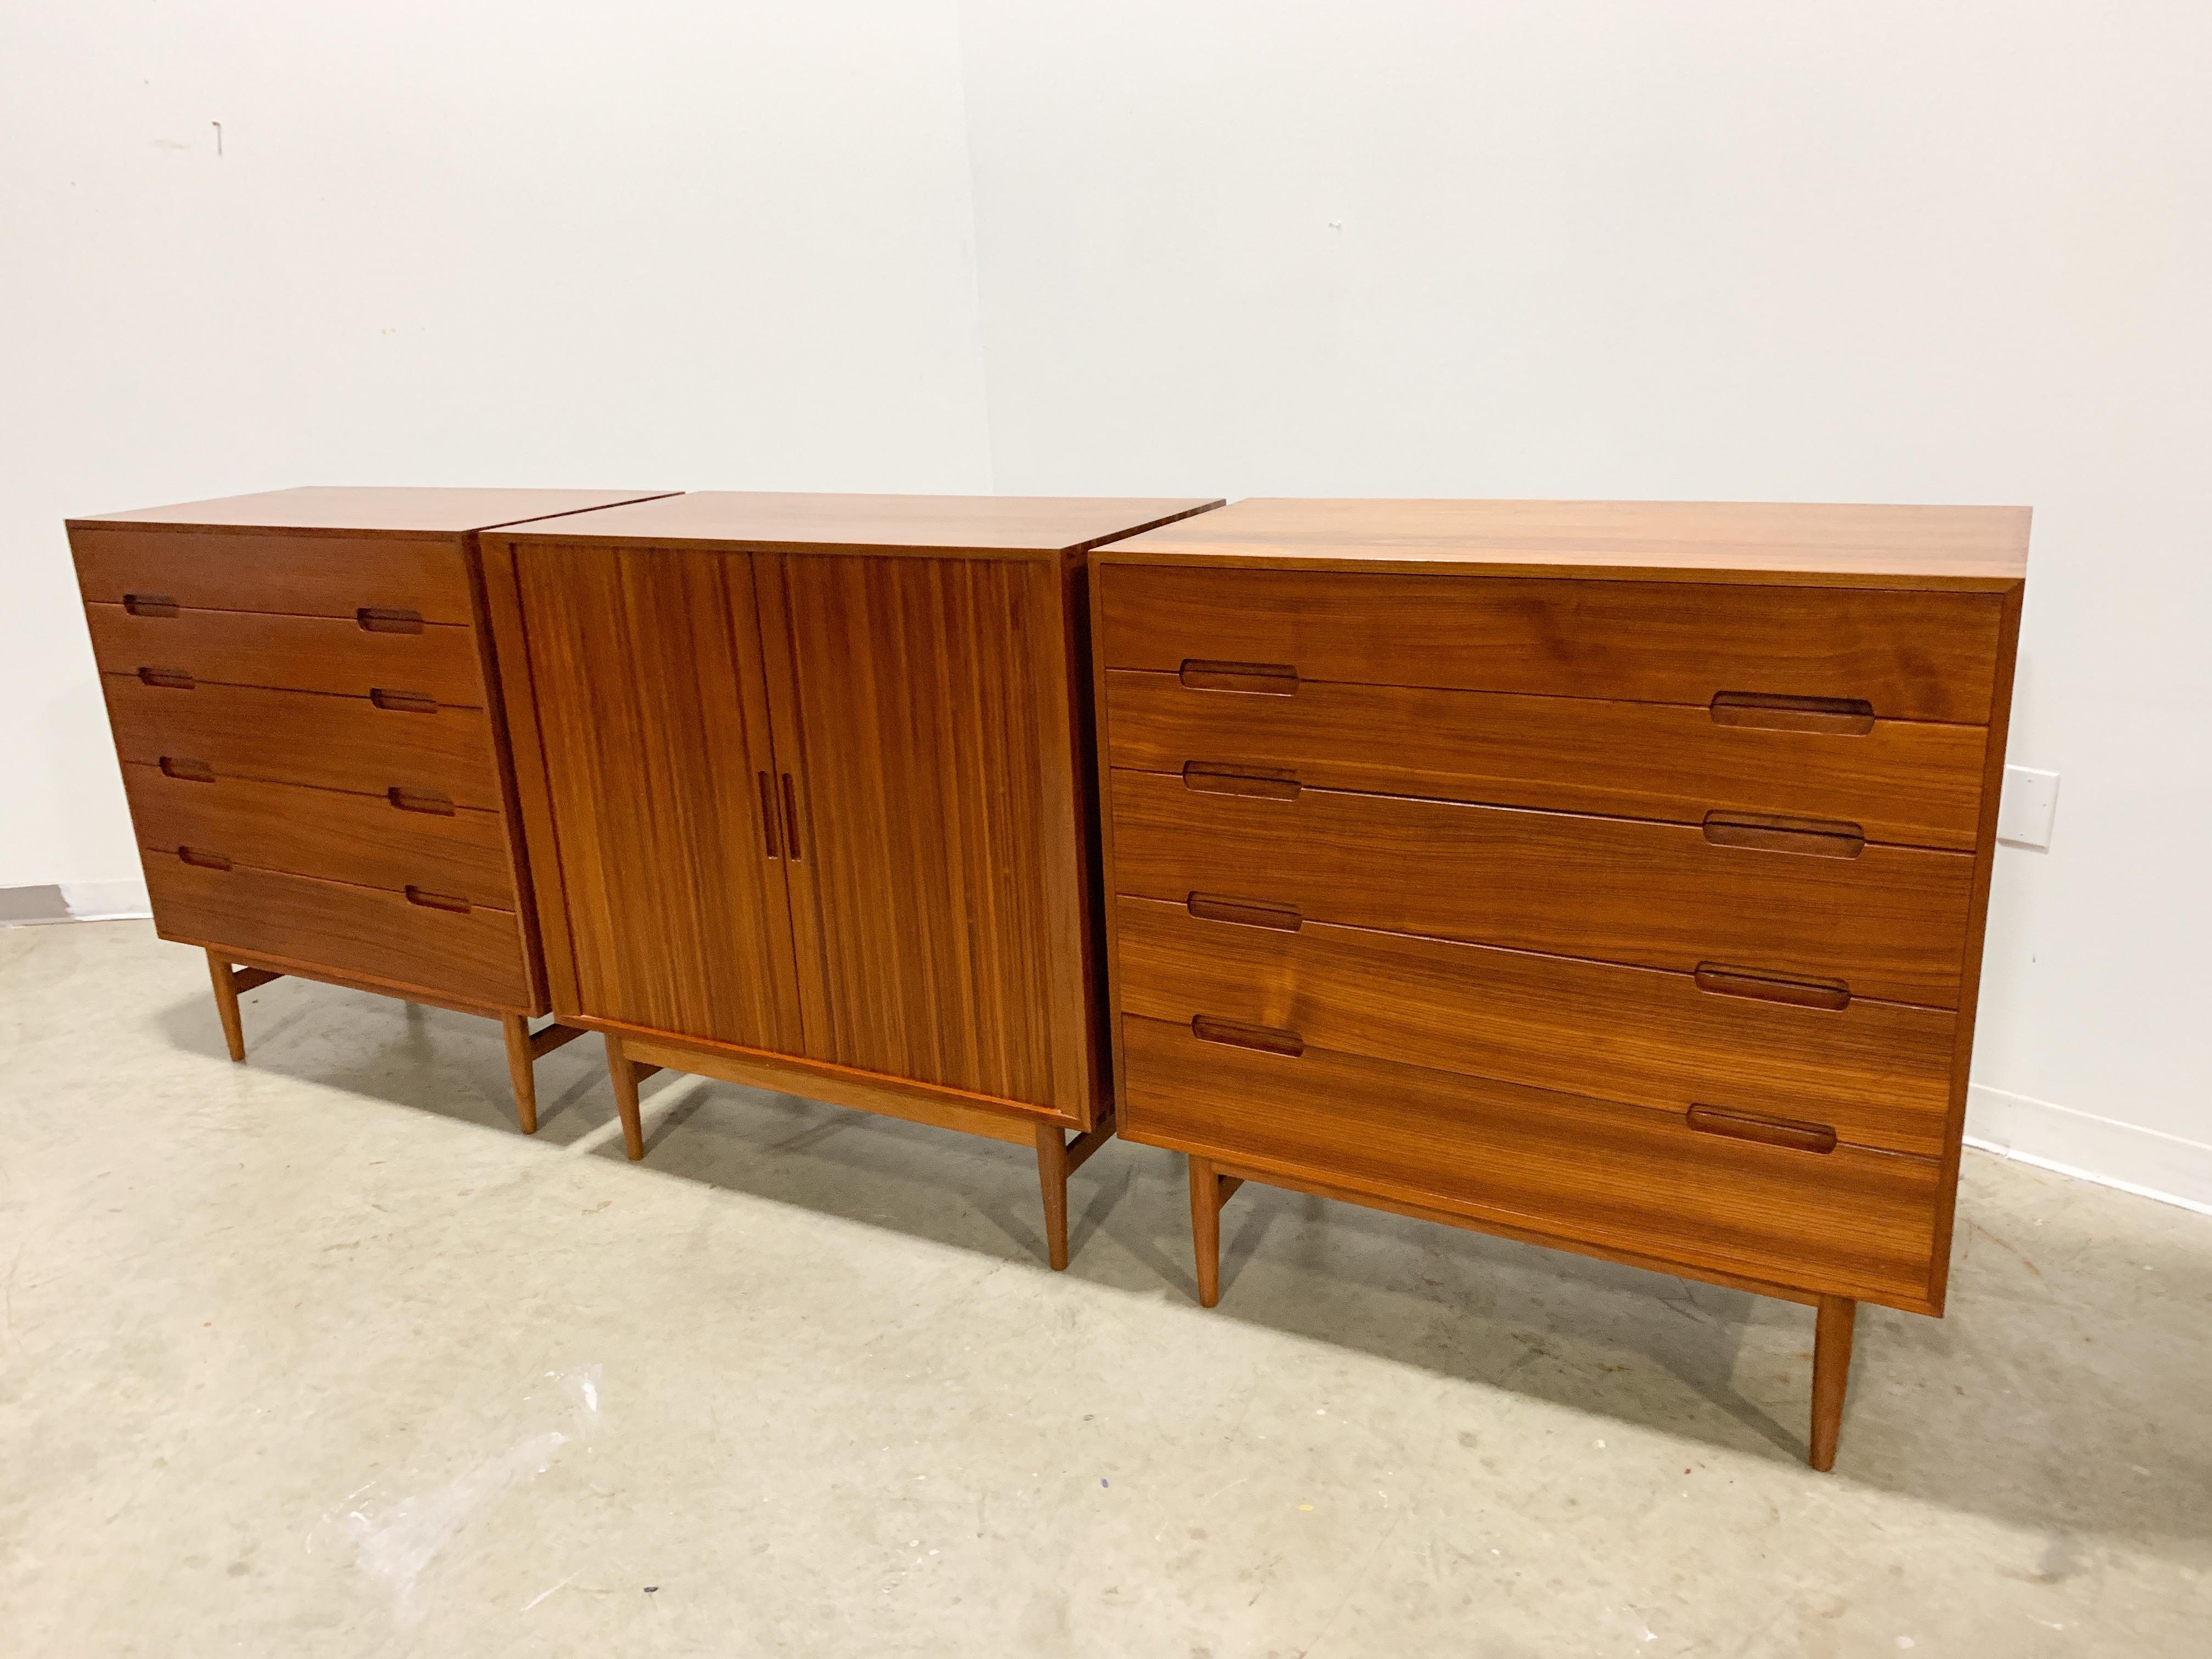 Stunning solid teak (not veneer) construction with dovetailed edges and finger jointed starts. Incredibly rich teak wood grain and subtle drawer pull details. This set is in excellent condition.

Dimensions are for 1 of the 3 included pieces of